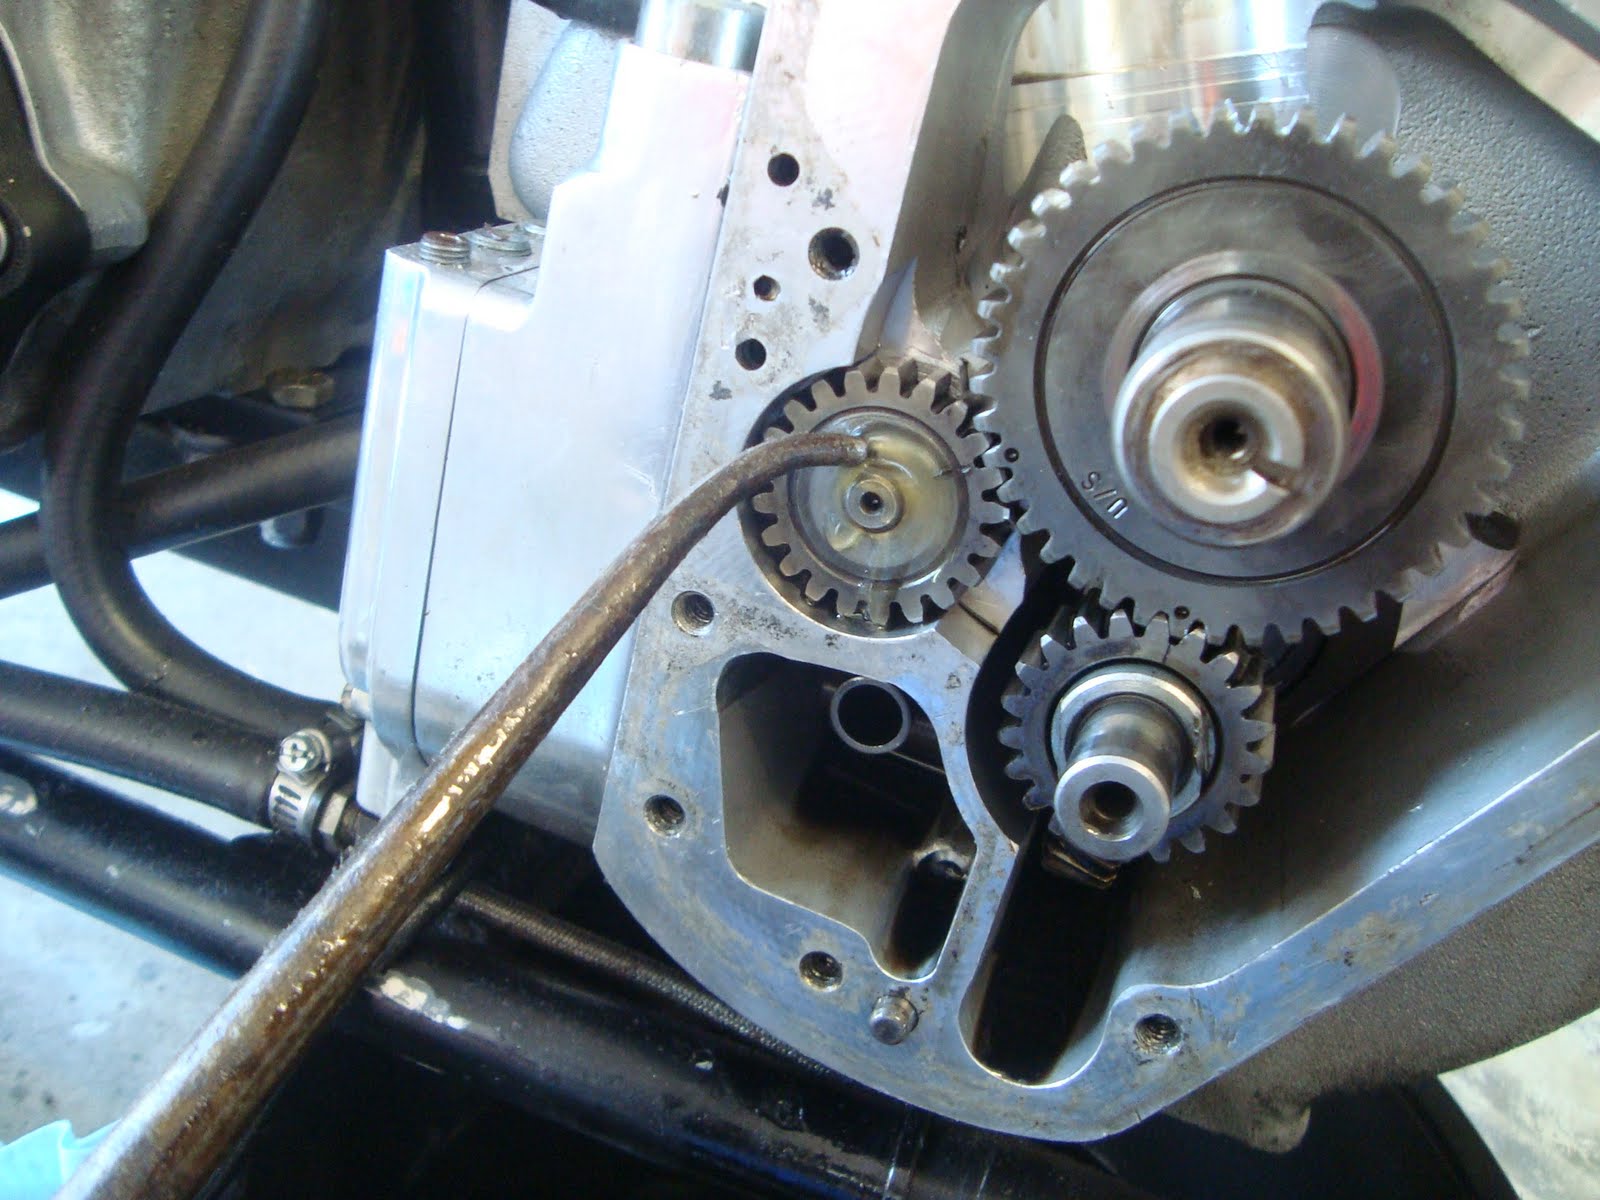 Tear it up, fix it, repeat: Shovelhead Camchest inspection and cleaning